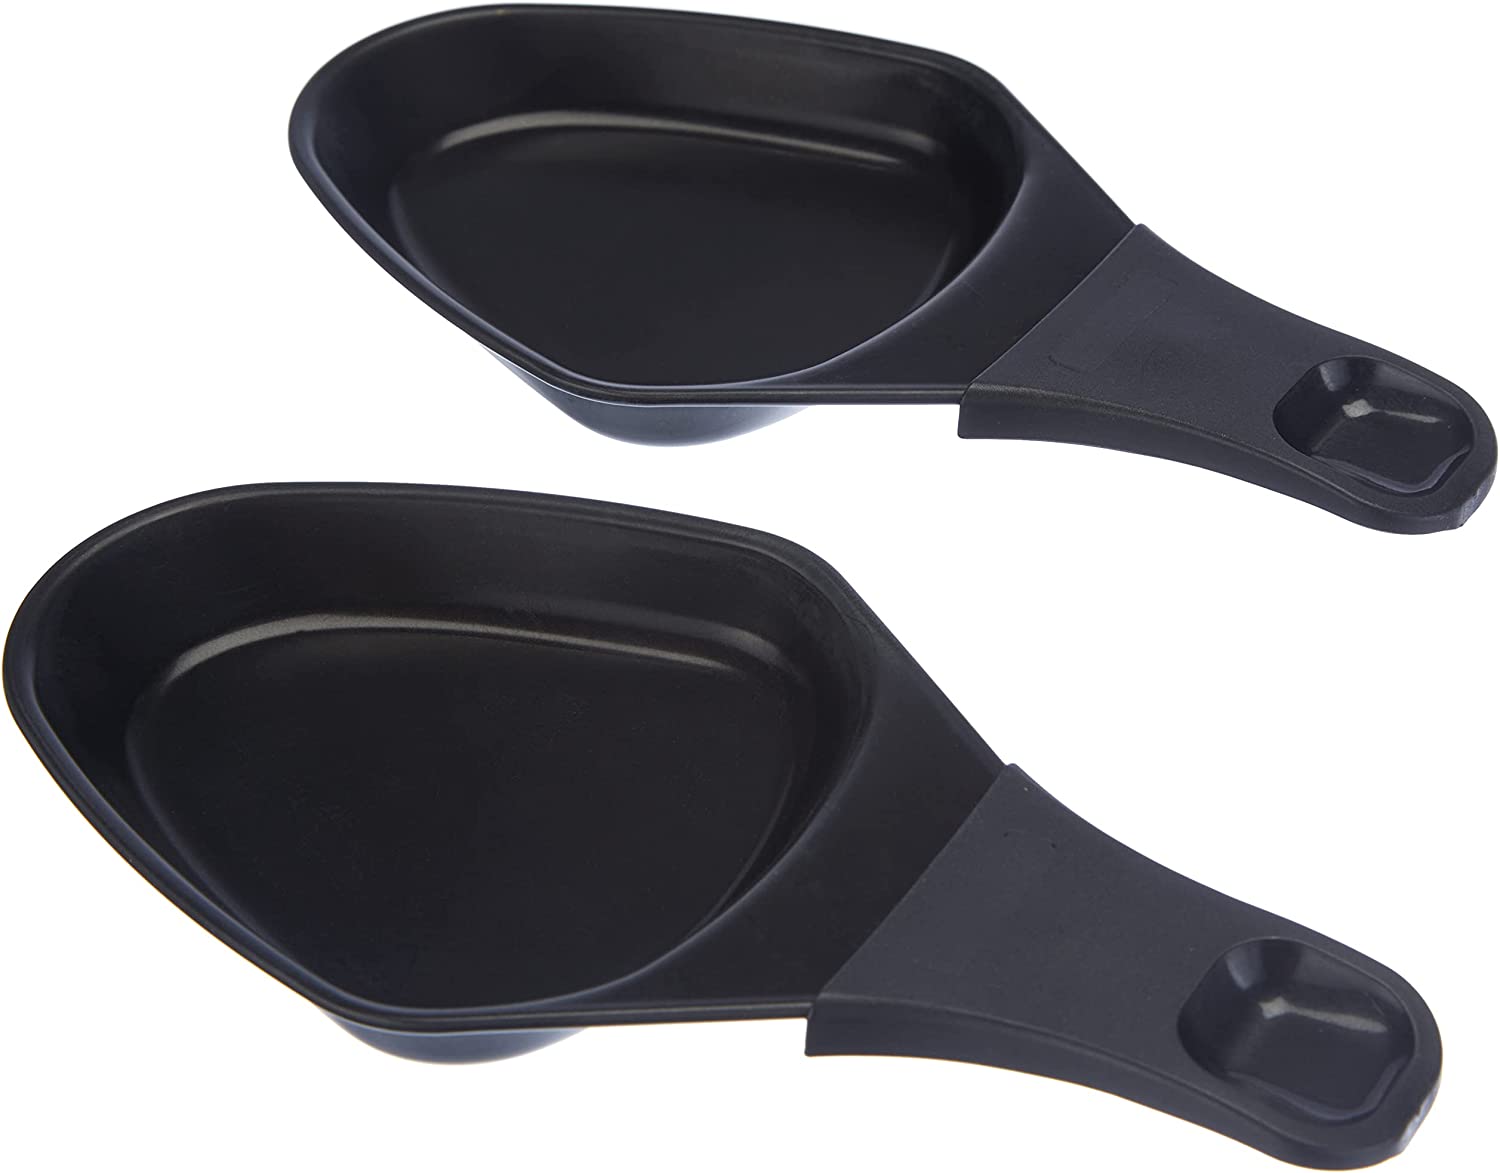 Tefal XA400102 Non-Stick Raclette Pans (Pack of 2)